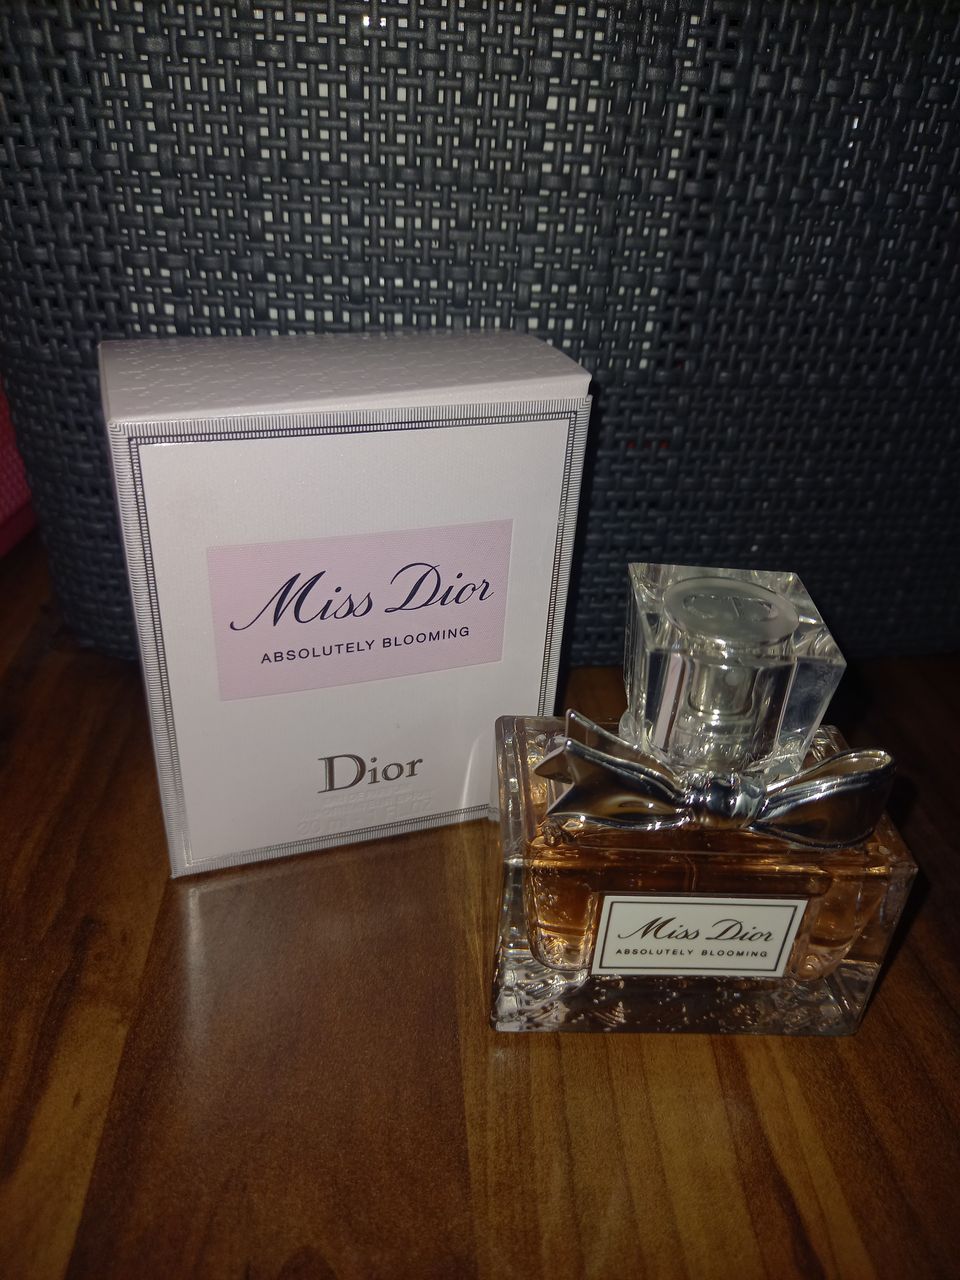 Dior absolutely blooming EdP 30 ml